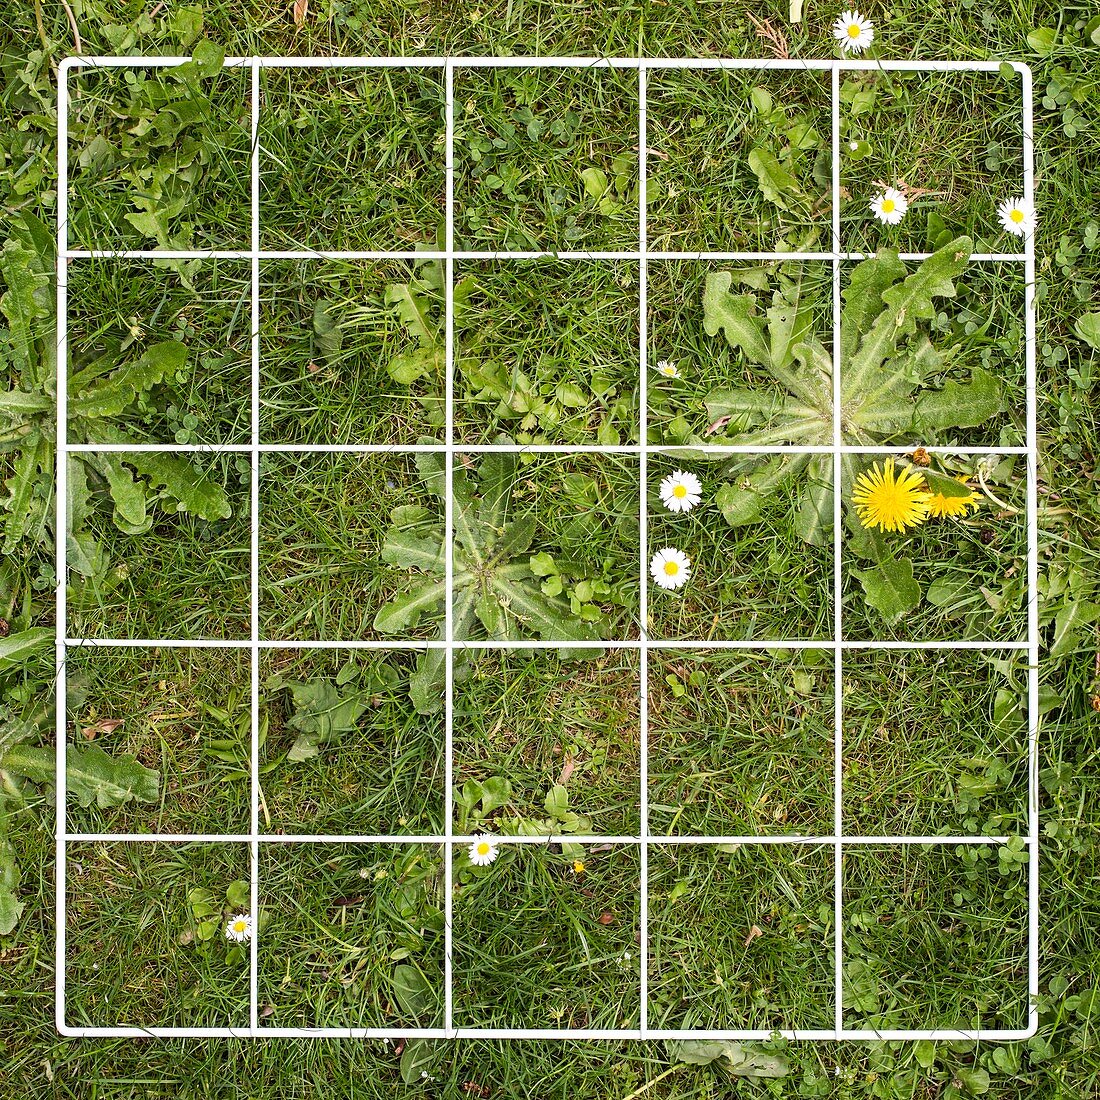 Quadrat on a lawn with weeds